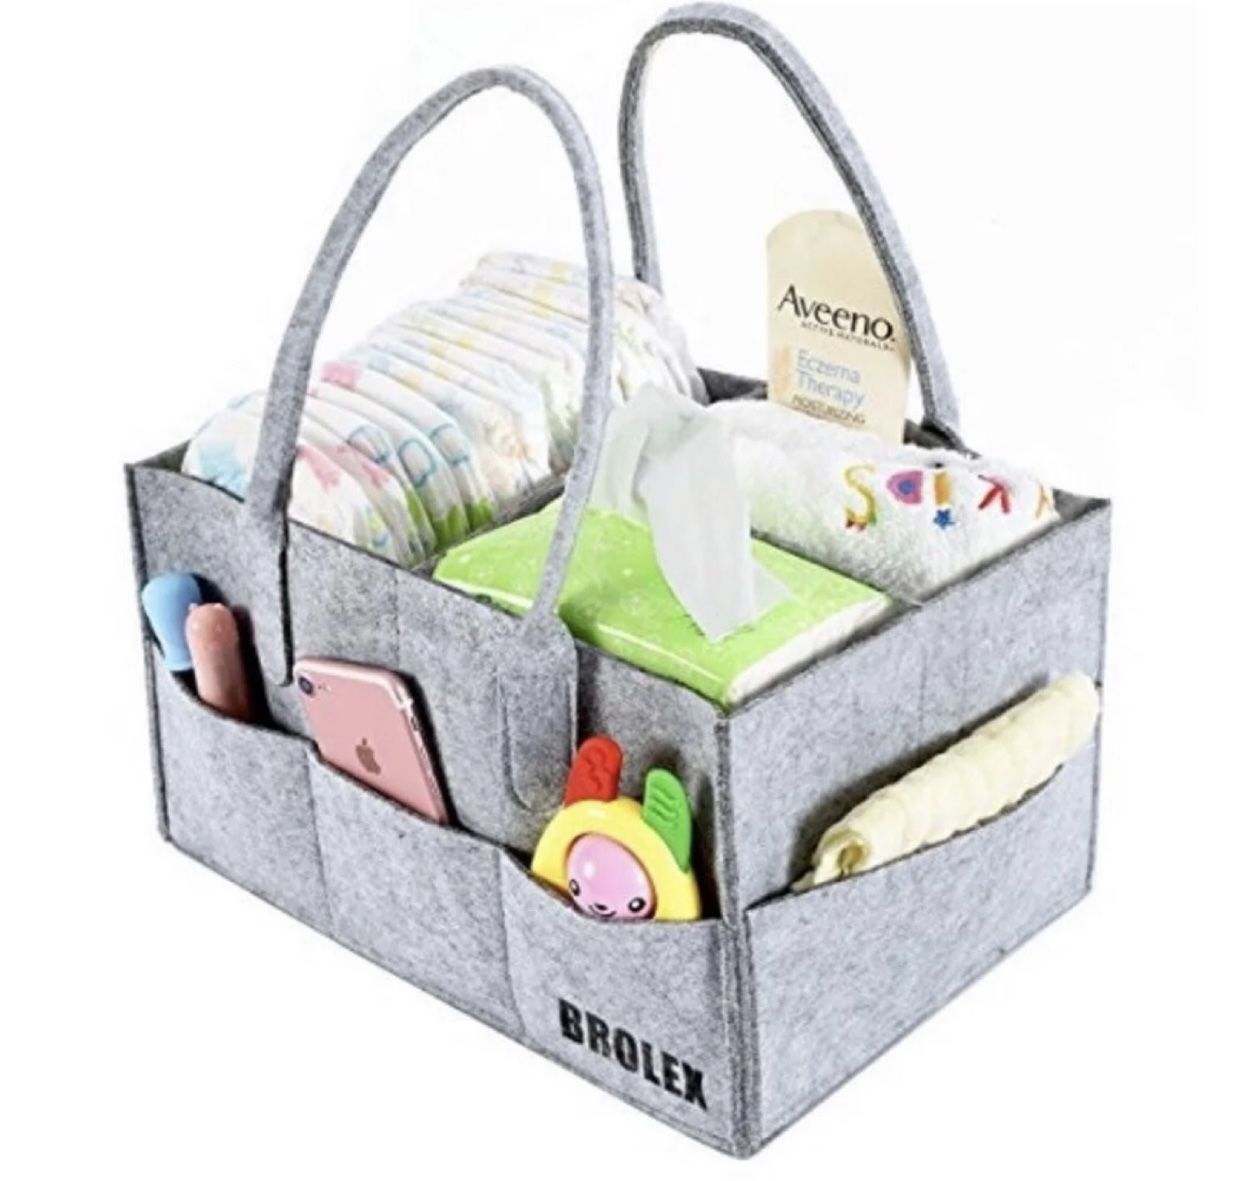 Baby Diaper Caddy - Nursery Storage Bin and Car Organizer for Diapers and Baby Wipes - Grey